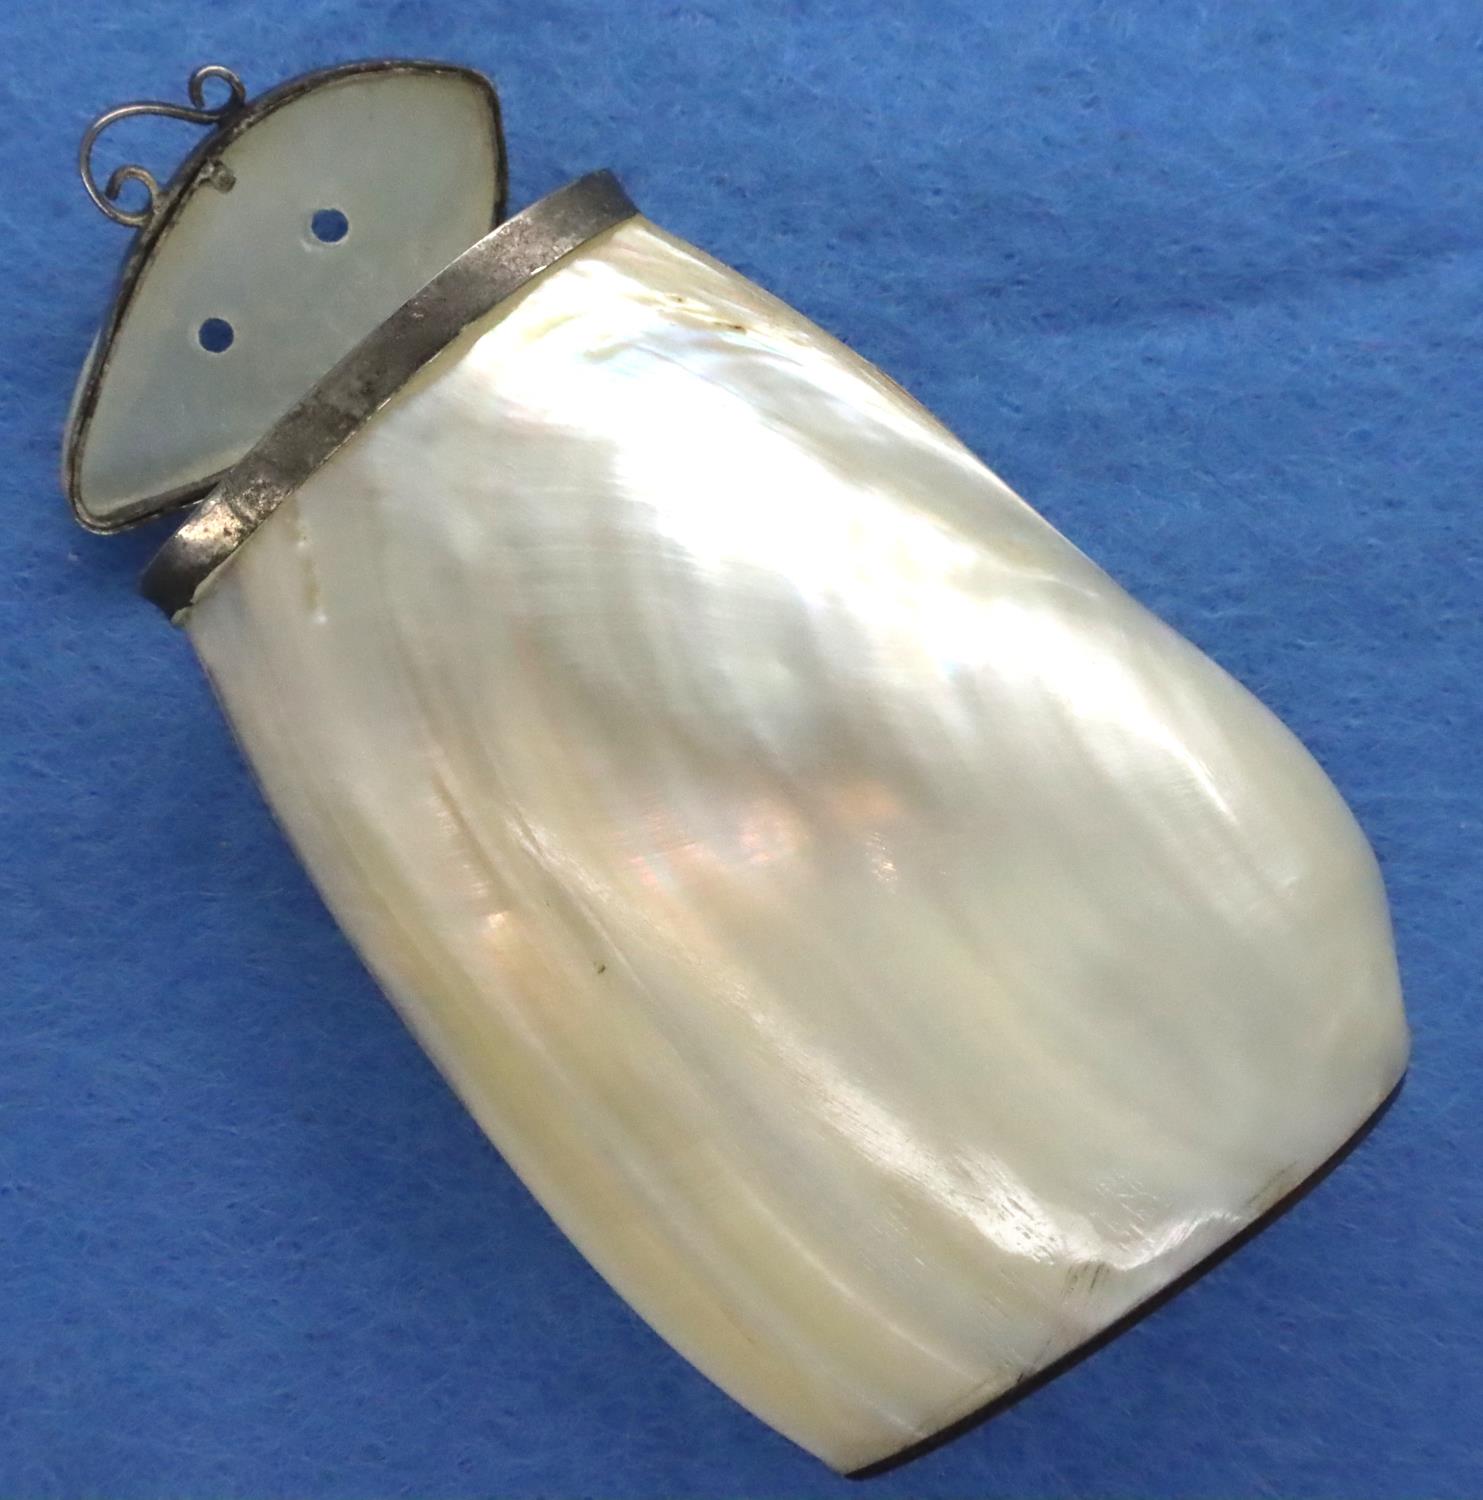 Mother of pearl lidded pot, H: 6 cm. P&P Group 1 (£14+VAT for the first lot and £1+VAT for